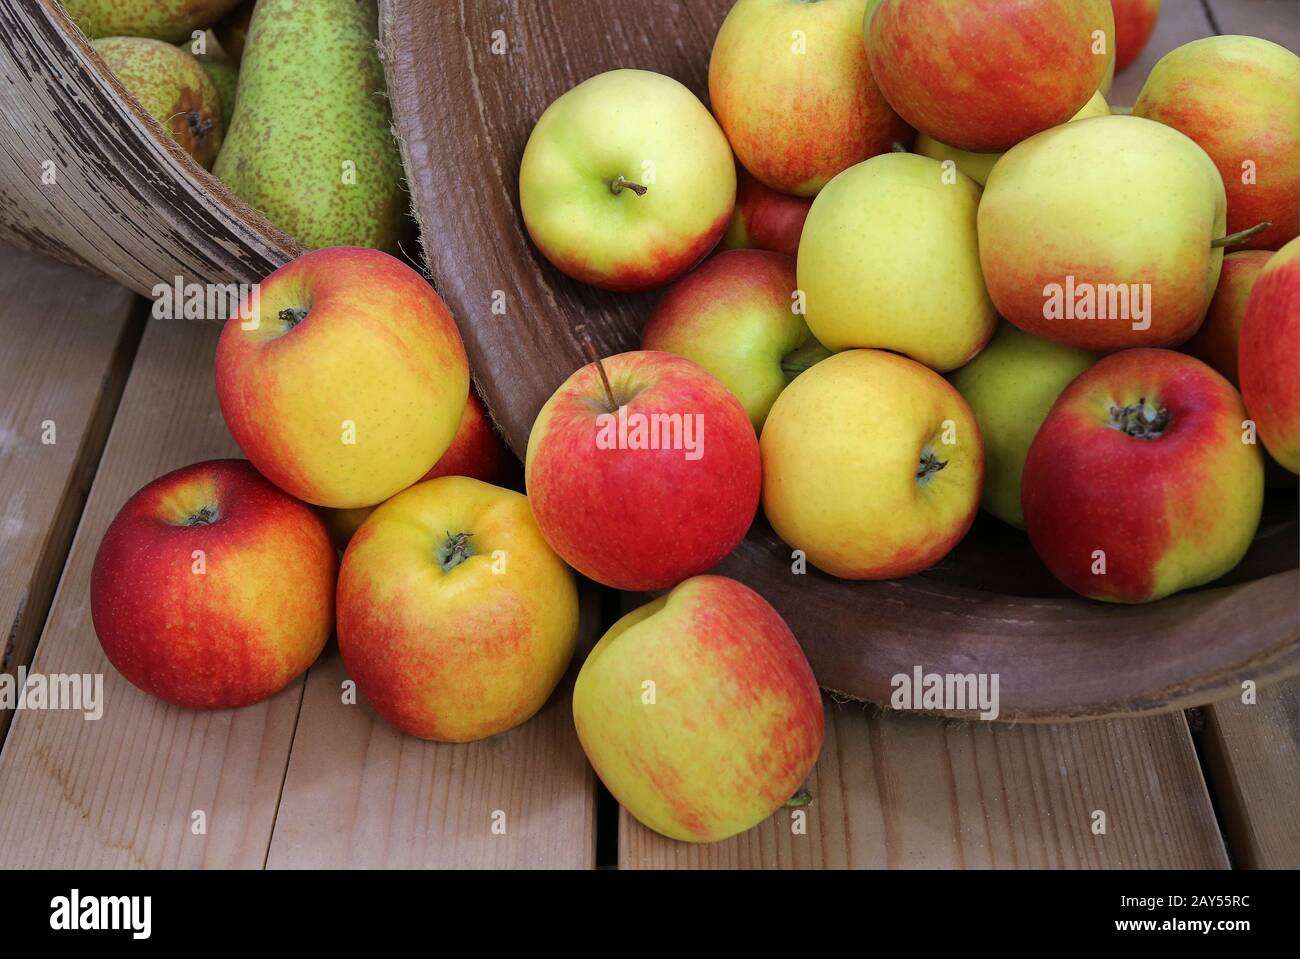 Still life with apples Stock Photo